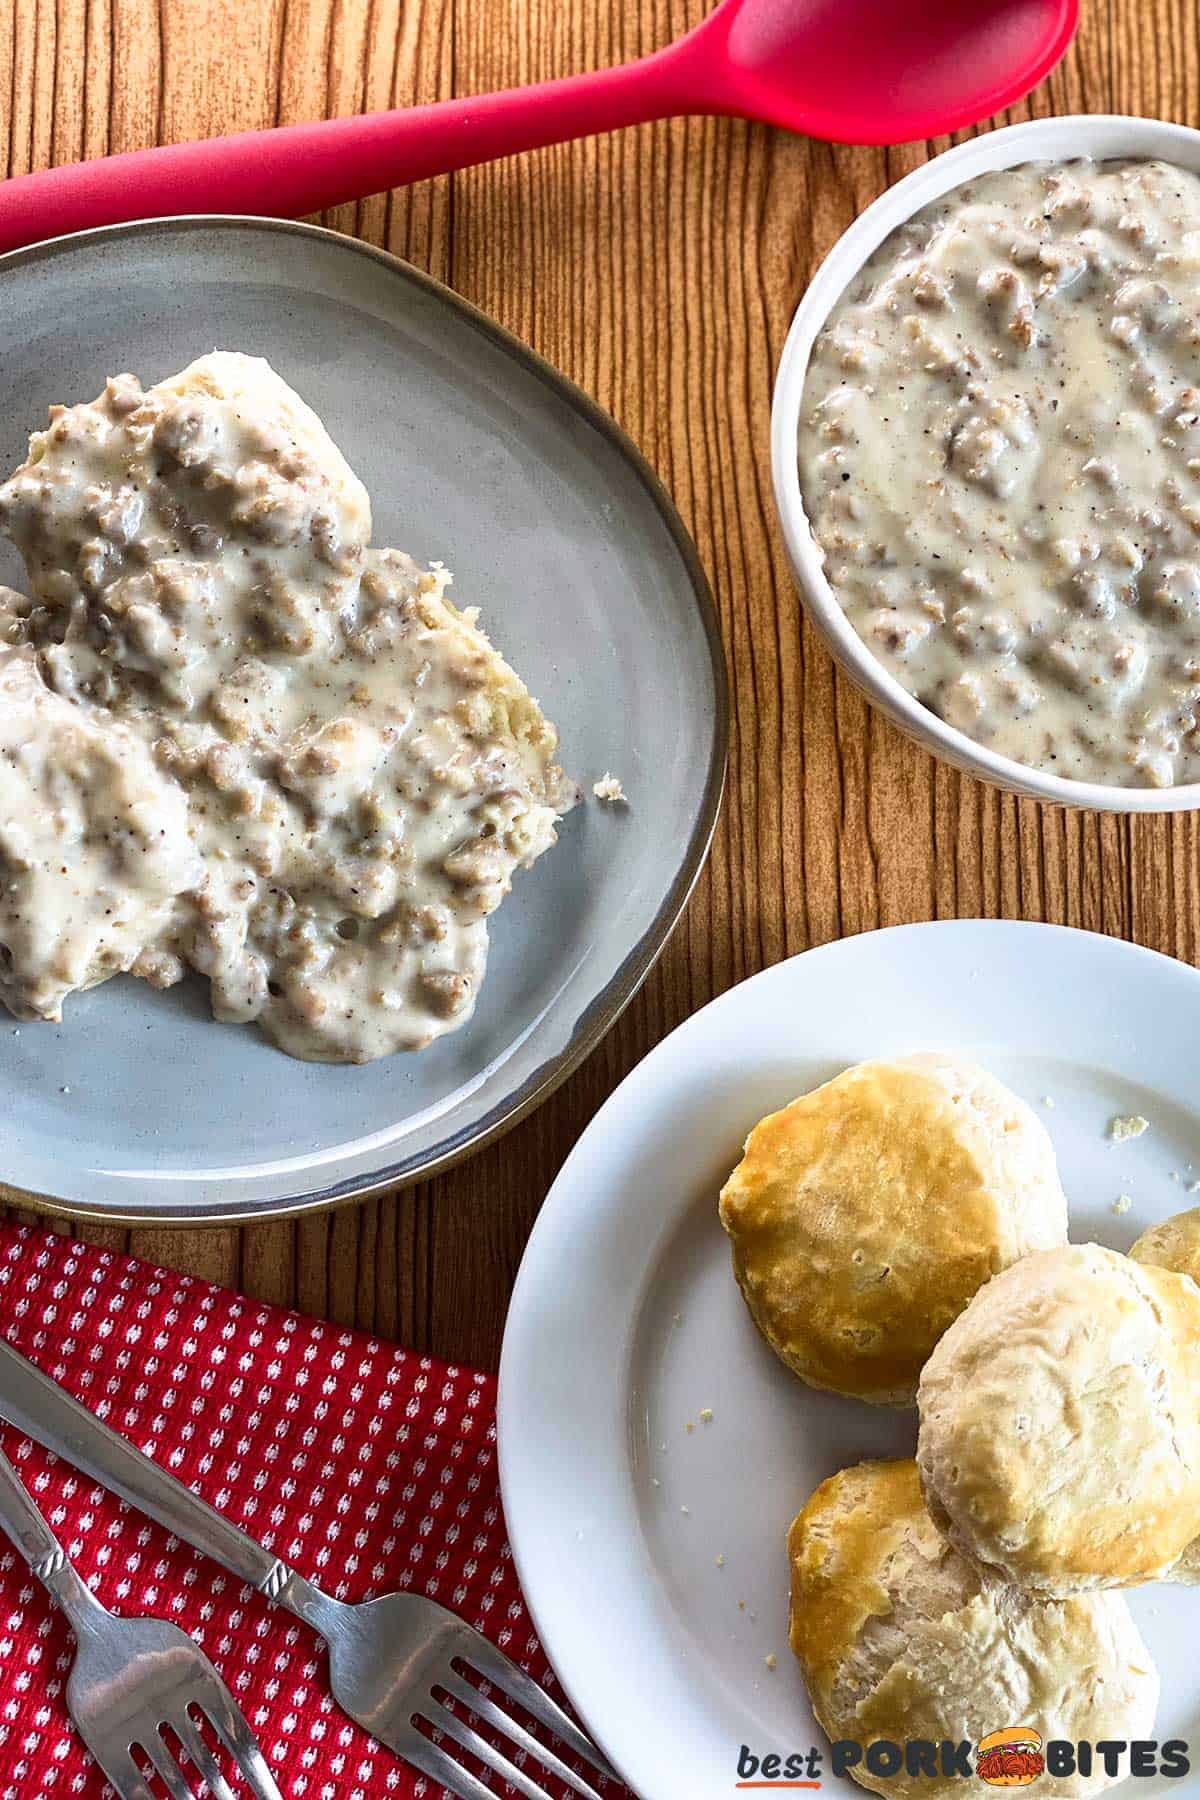 a plate of biscuits, a plate of biscuits and gravy, and a bowl of gravy on a table with a spoon and cutlery